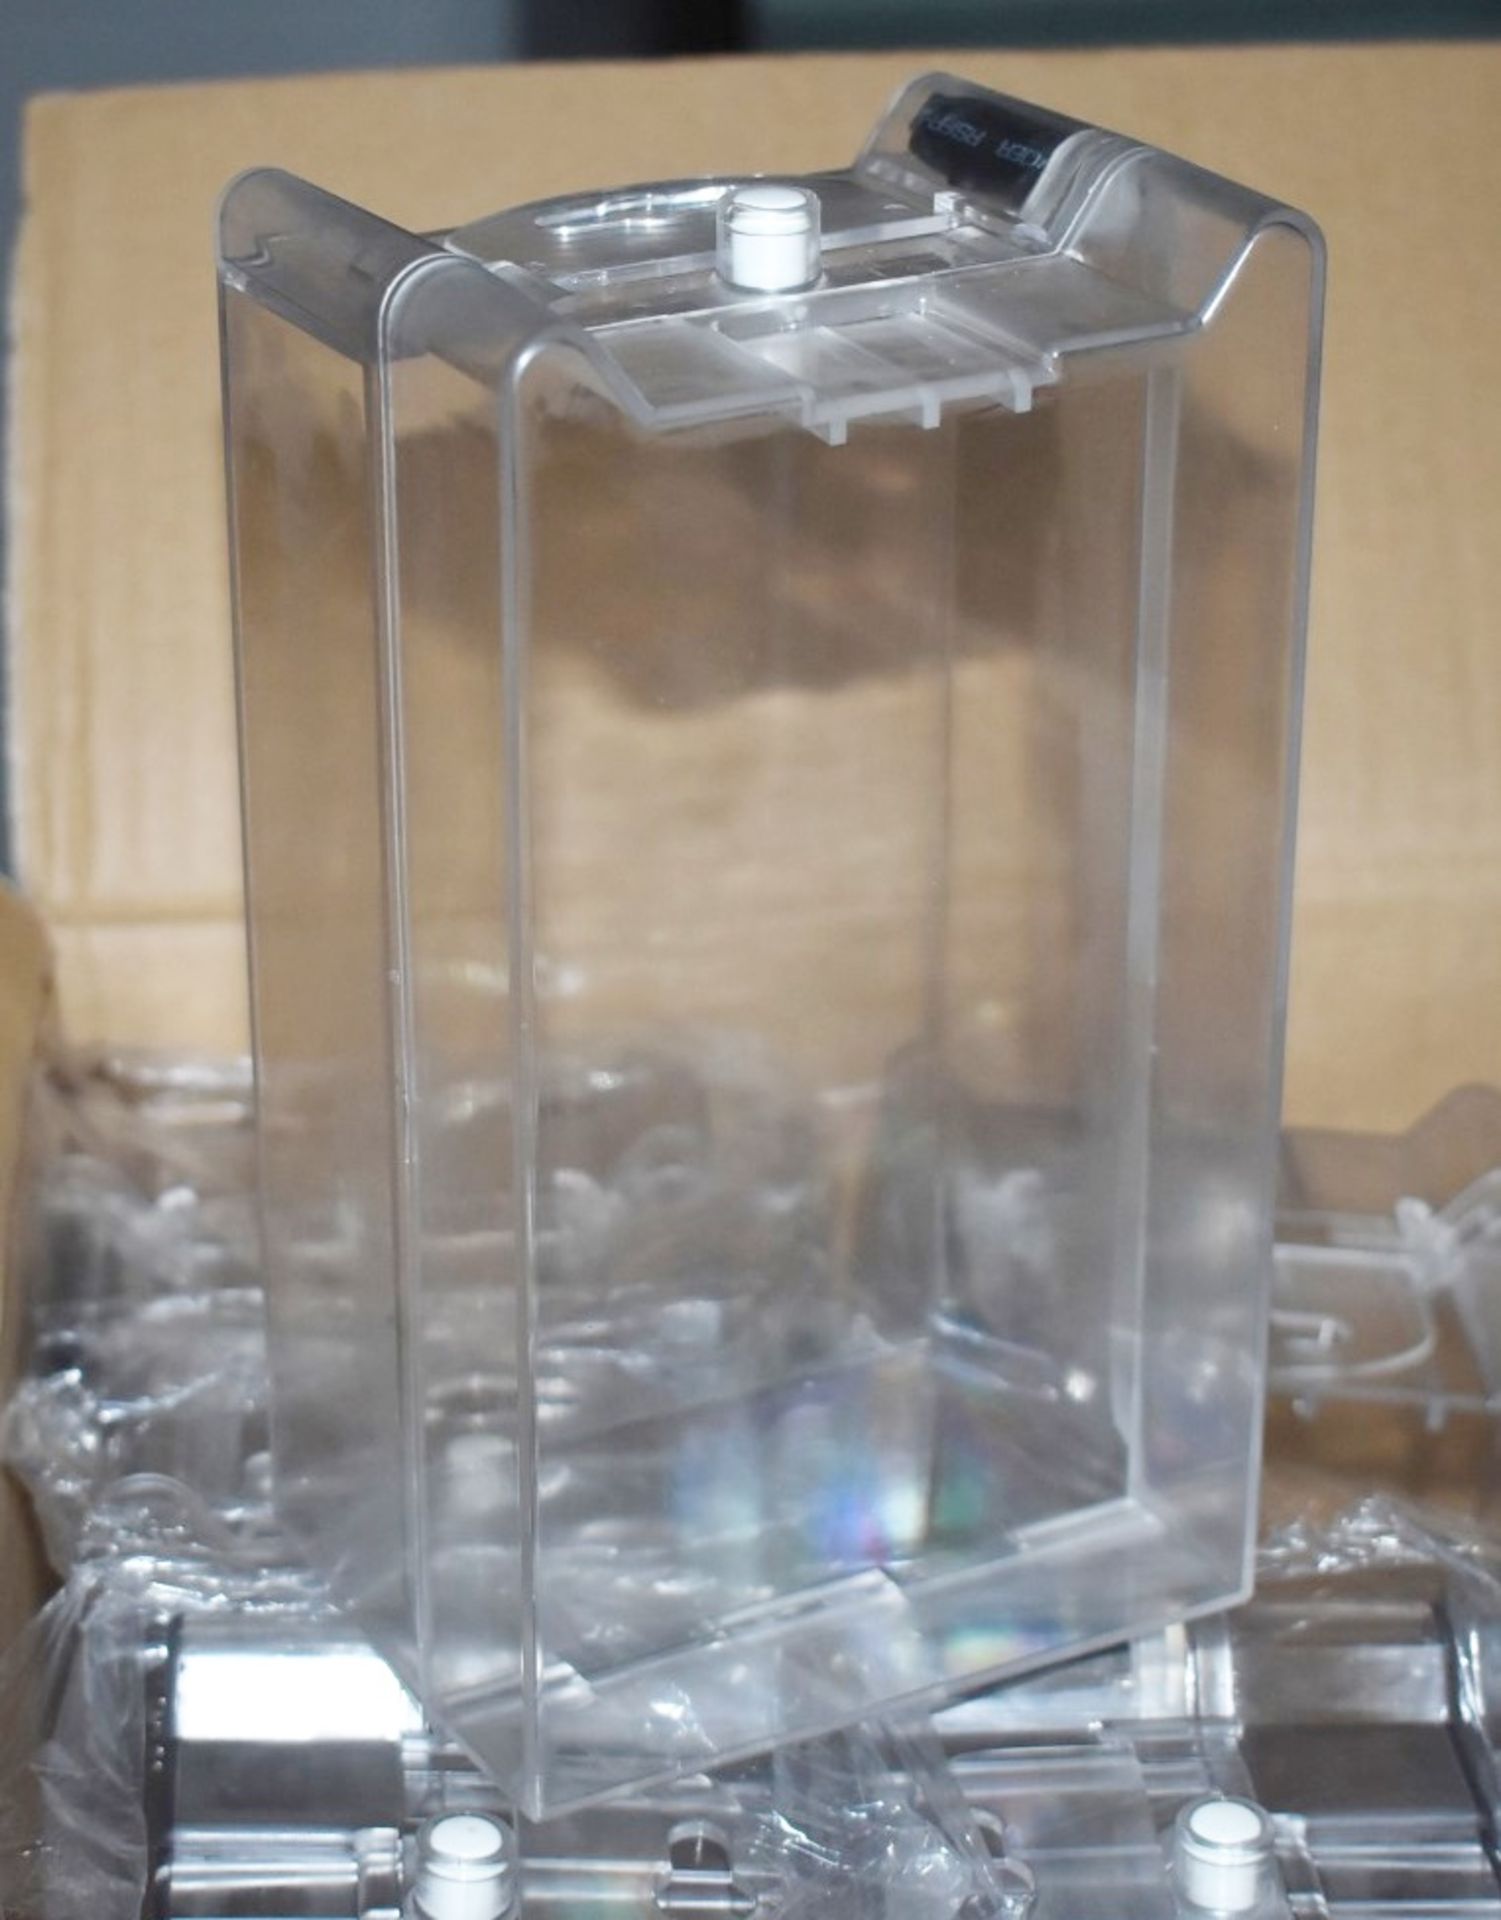 40 x Catalyst Clear Acrylic Retail Security Safer Cases With RF Tags and Hanging Tags - Brand New - Image 6 of 8